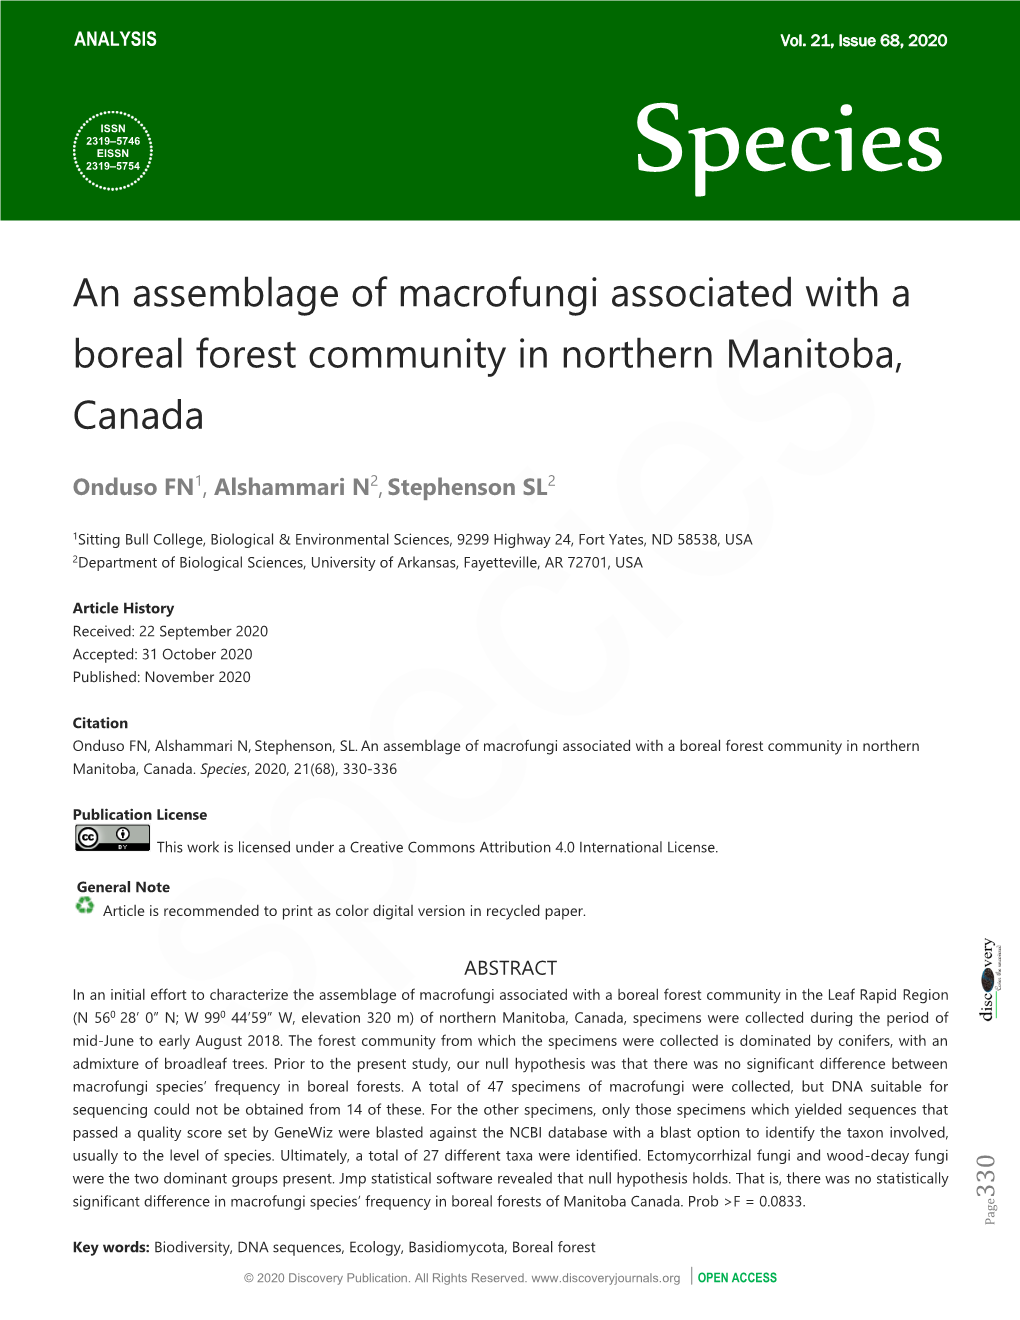 An Assemblage of Macrofungi Associated with a Boreal Forest Community in Northern Manitoba, Canada